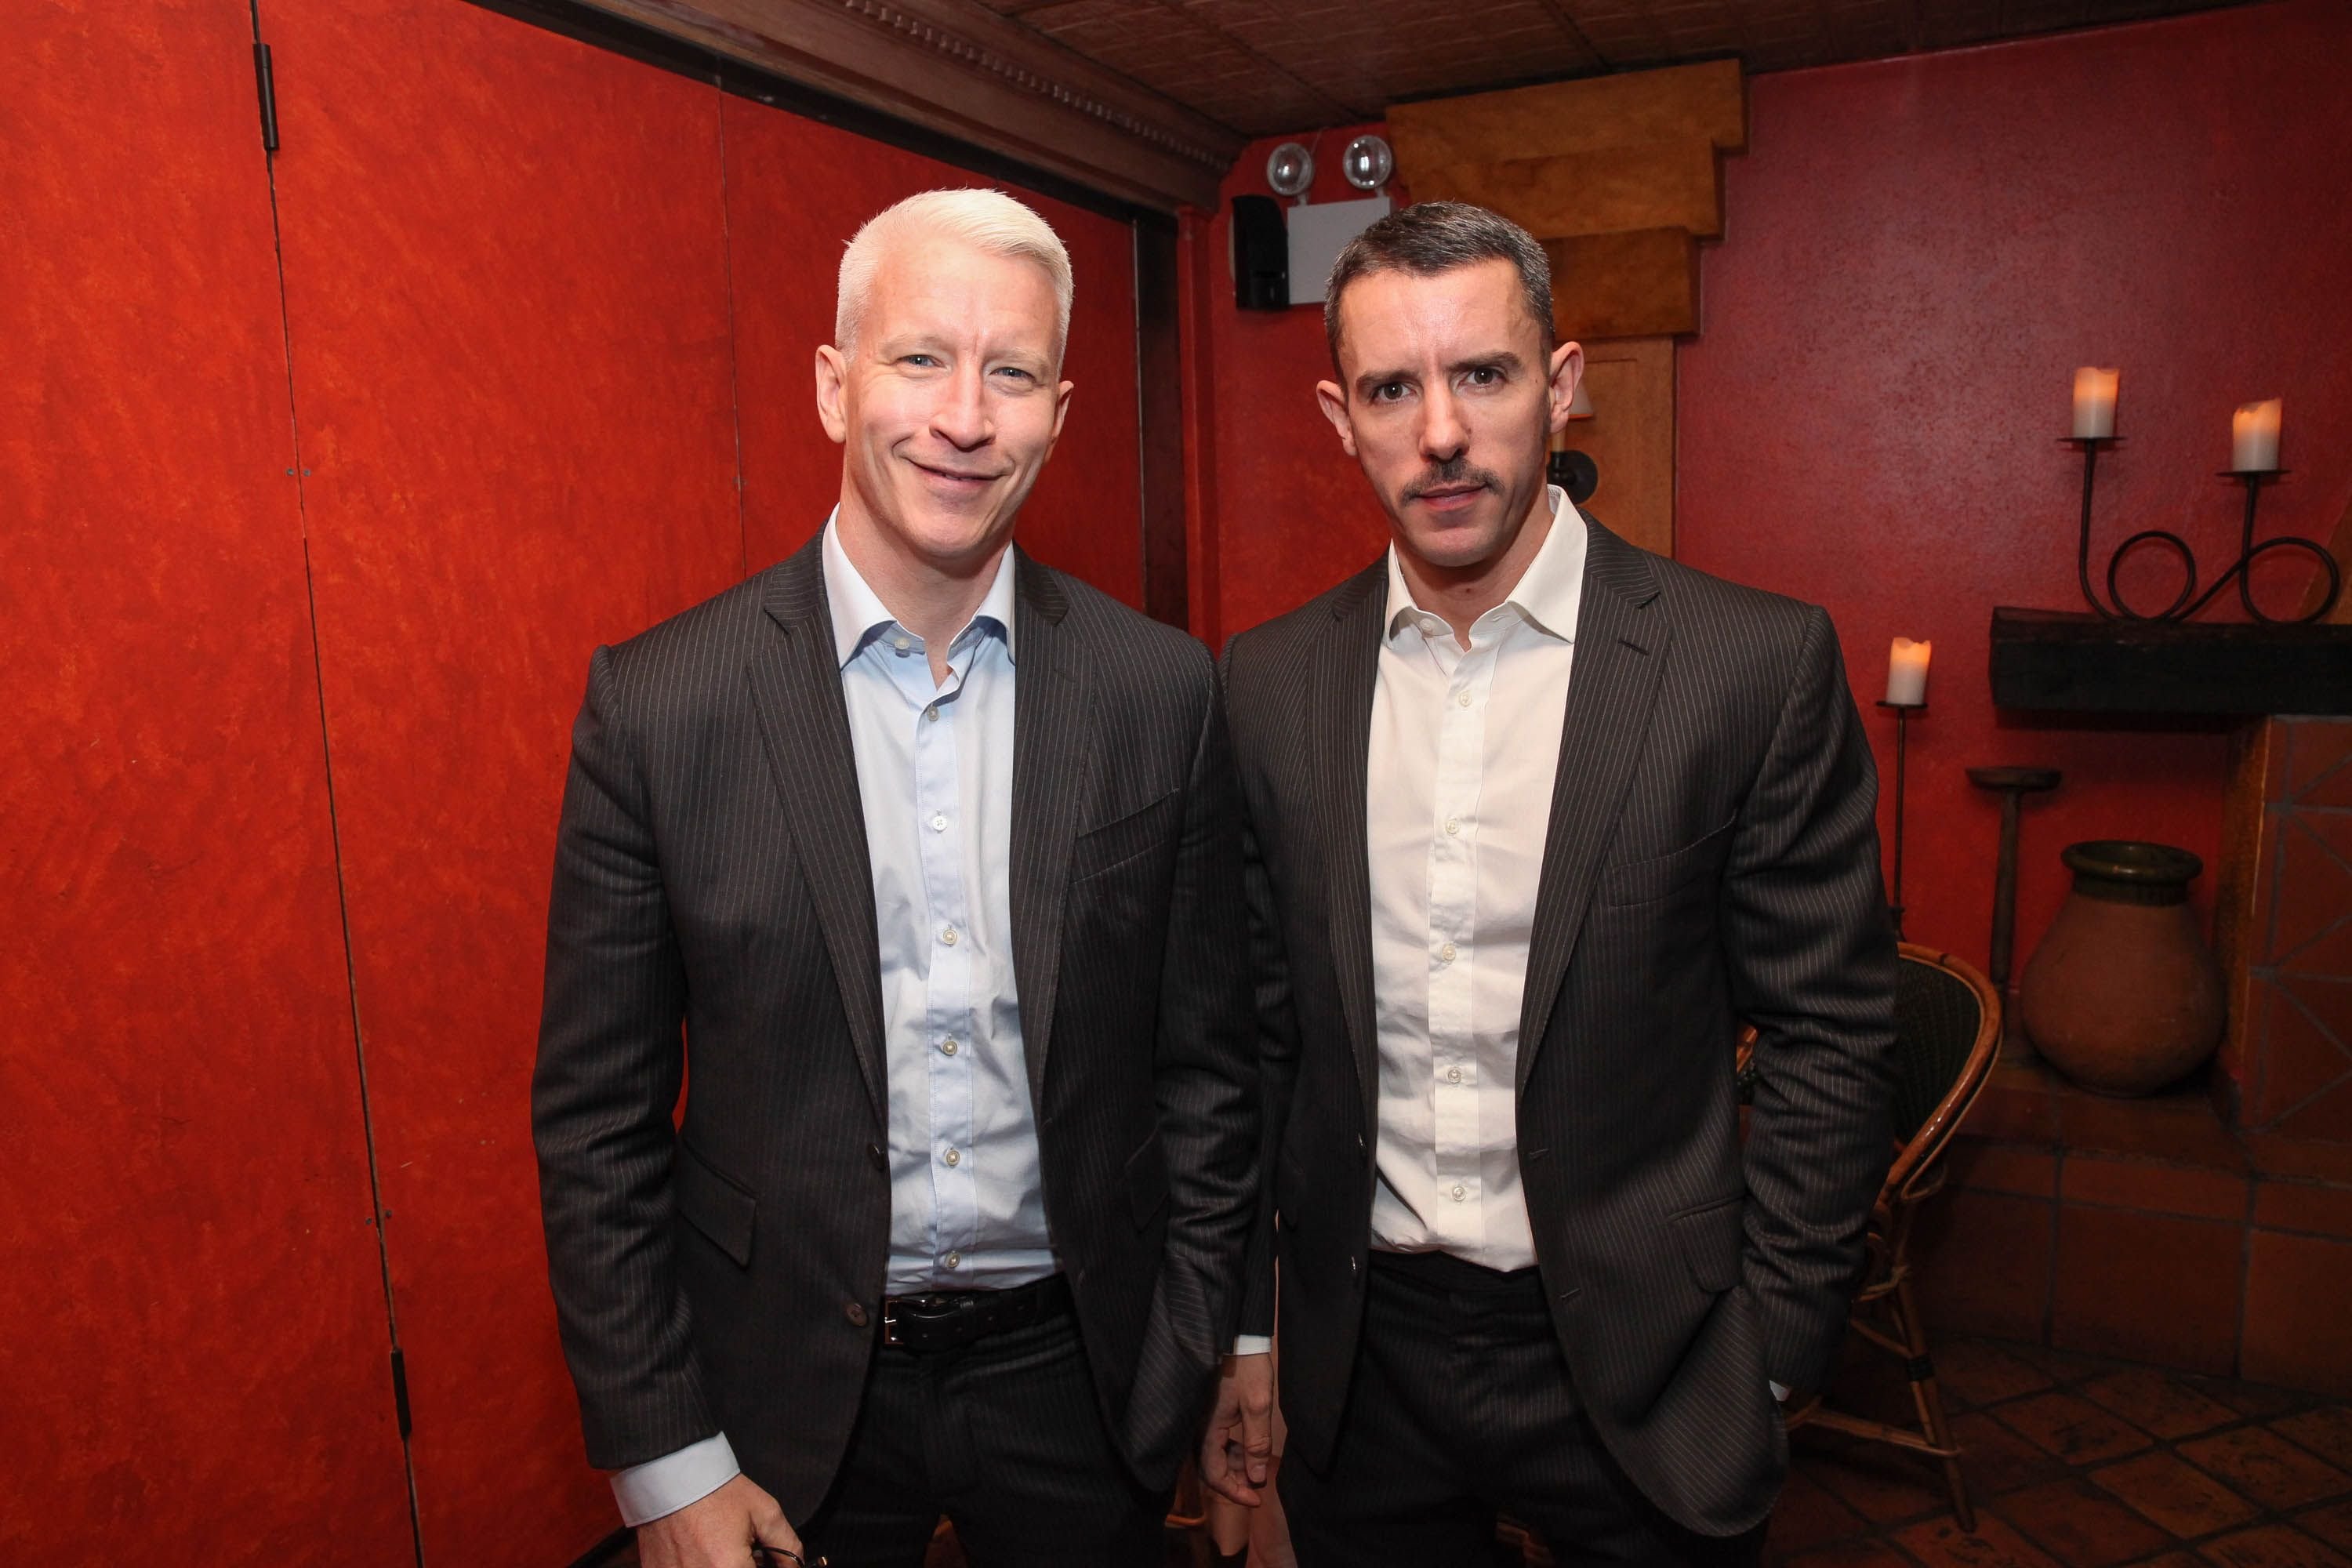 Anderson Cooper and Benjamin Maisani at Kathy Griffin's Carnegie Hall Performance official afterparty on November 8, 2013, in New York City. | Source: Getty Images